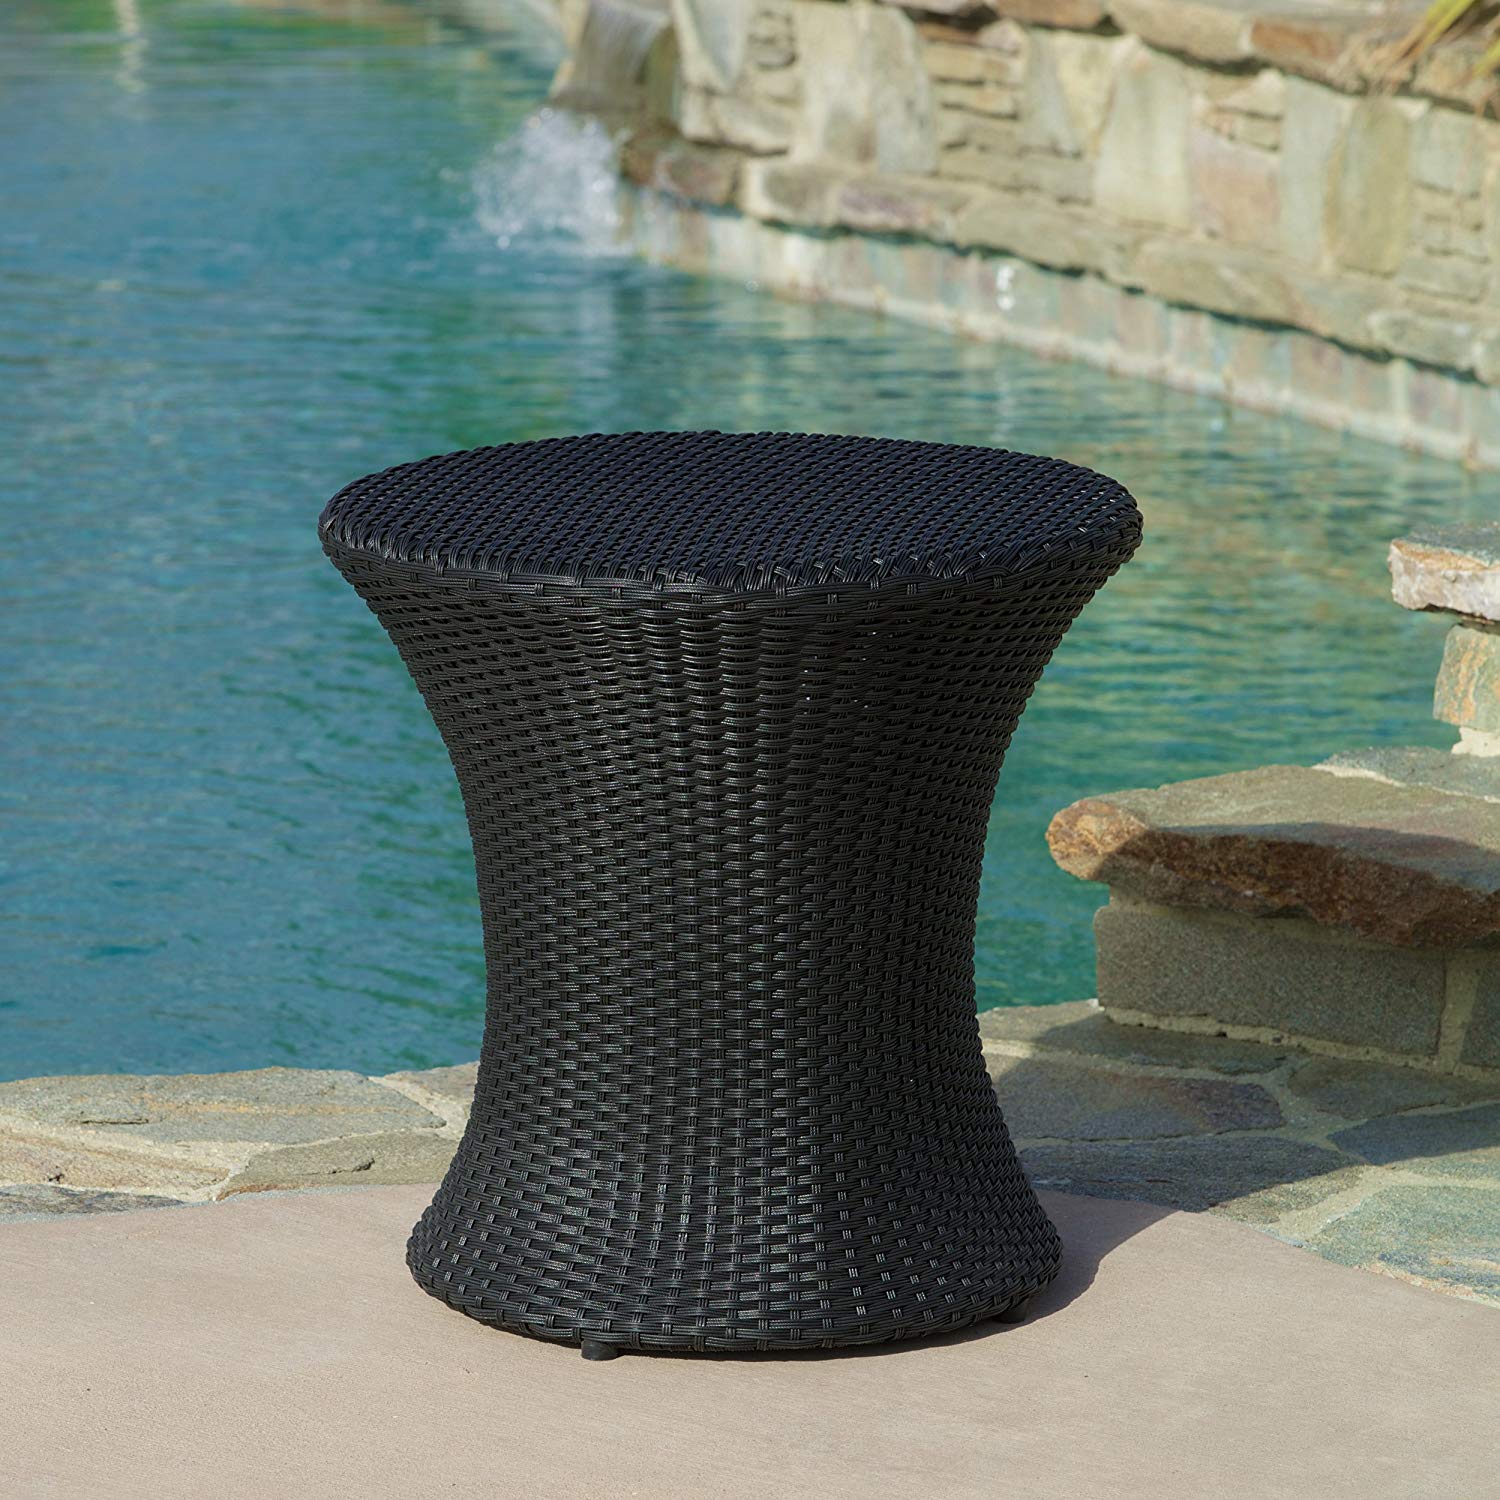 great furniture lorenzo outdoor black wicker round accent table garden vintage nightstands gallerie beds dark wood side frosted glass cylinder lamp small bedroom ideas ikea